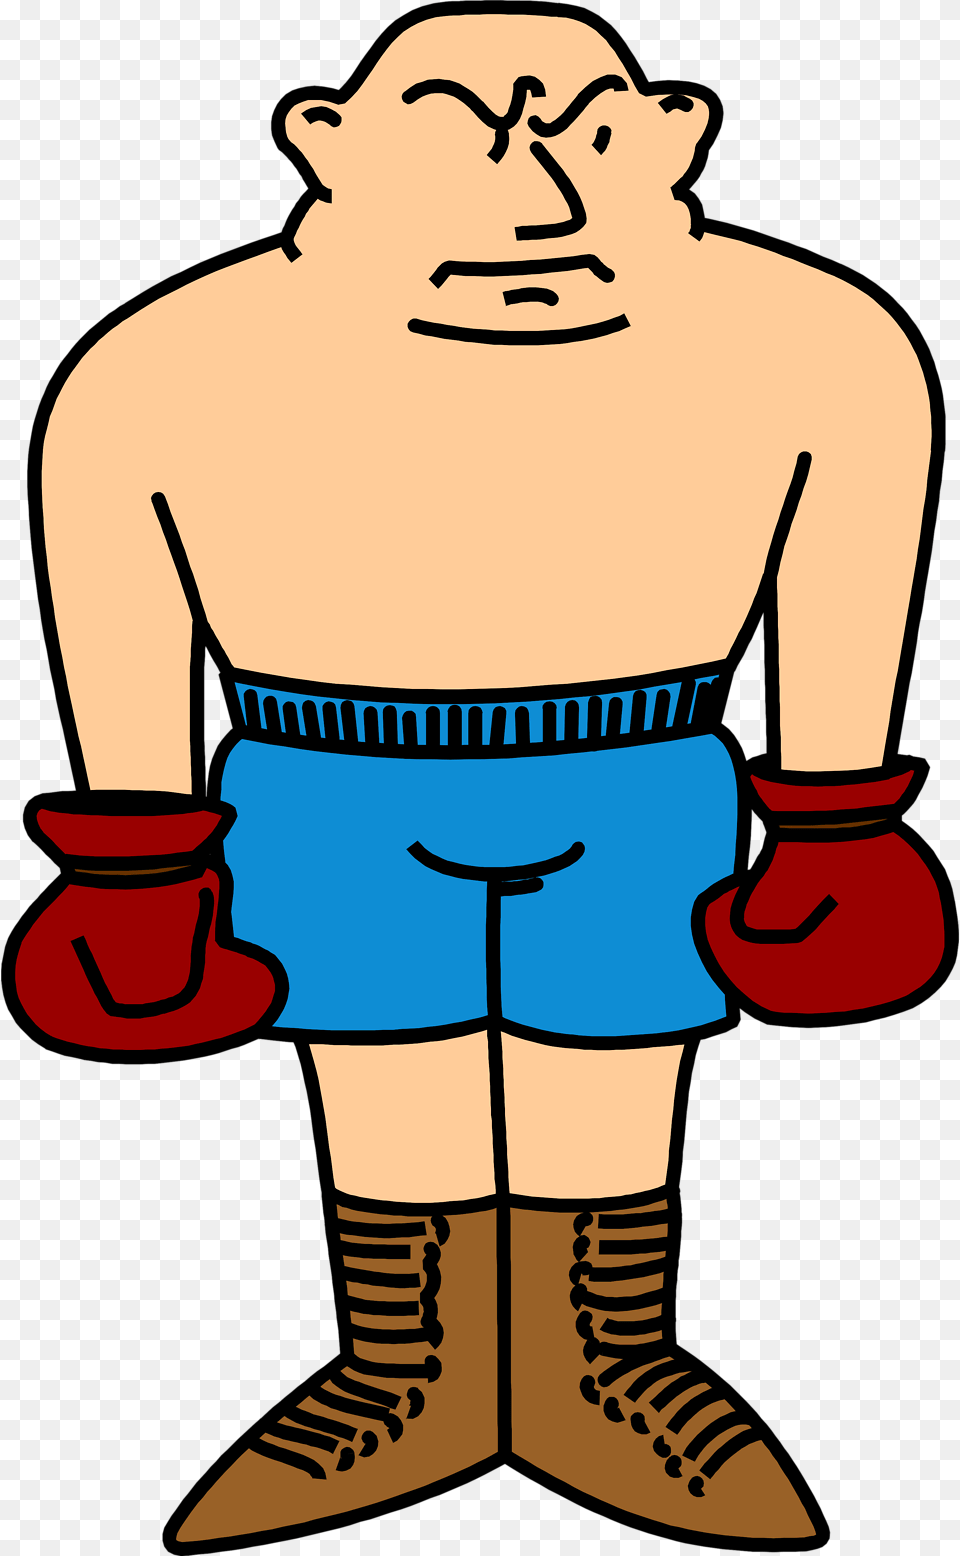 Boxing Free Stock Photo Illustration Of A Boxer Clipart No Background, Clothing, Shorts, Glove, Adult Png Image